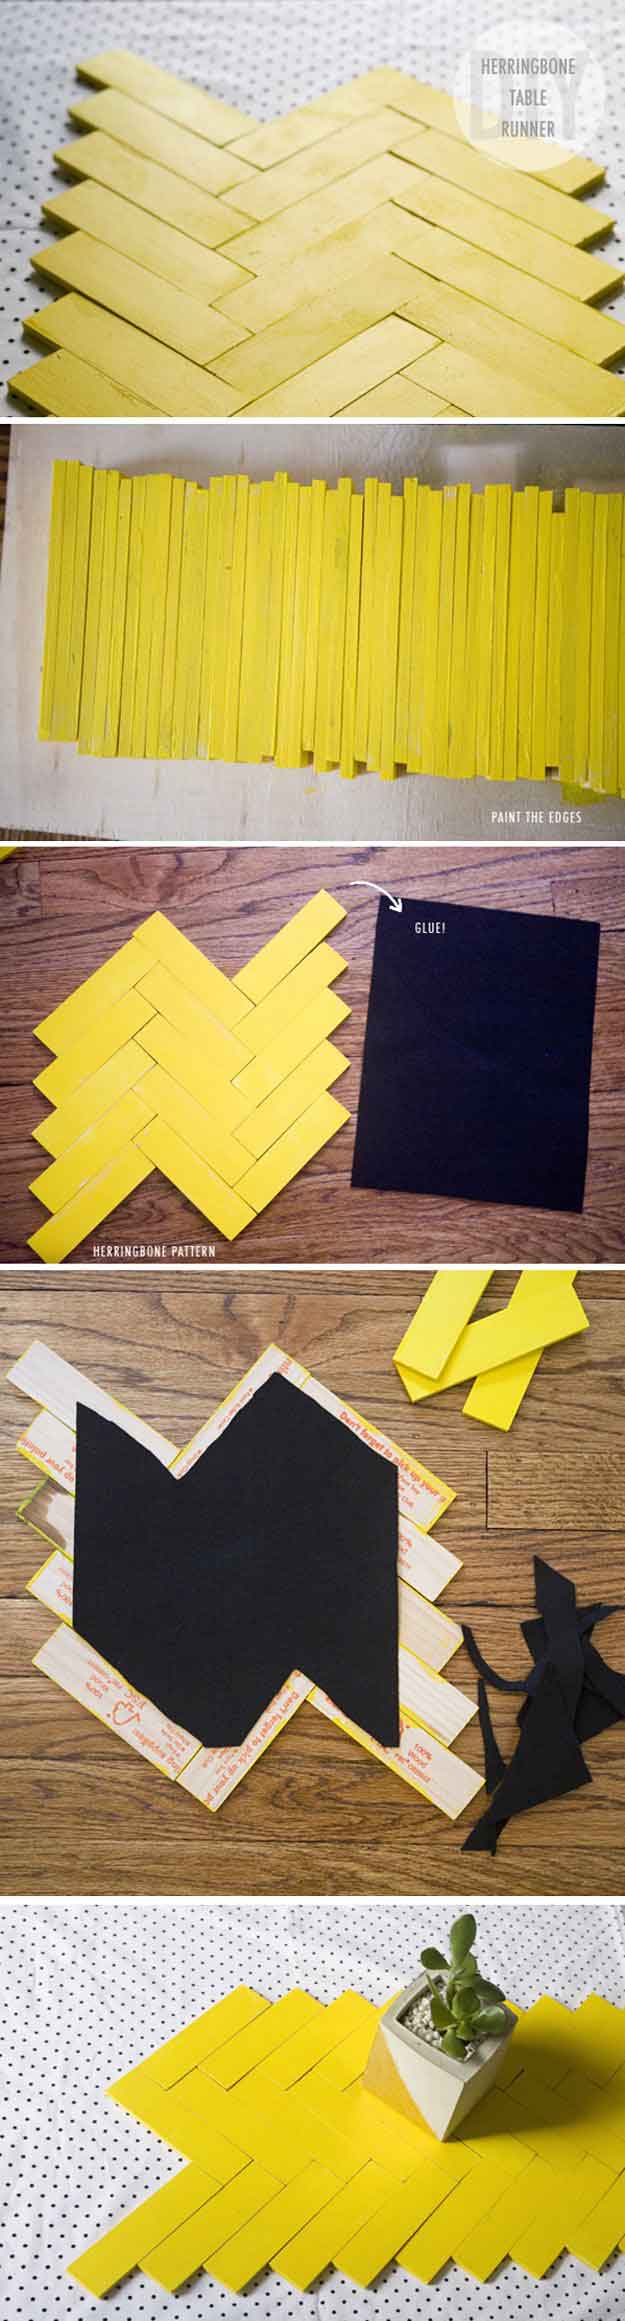 DIY Paint Stick Table Runner | 17 Amazing DIY Paint Chip Projects 